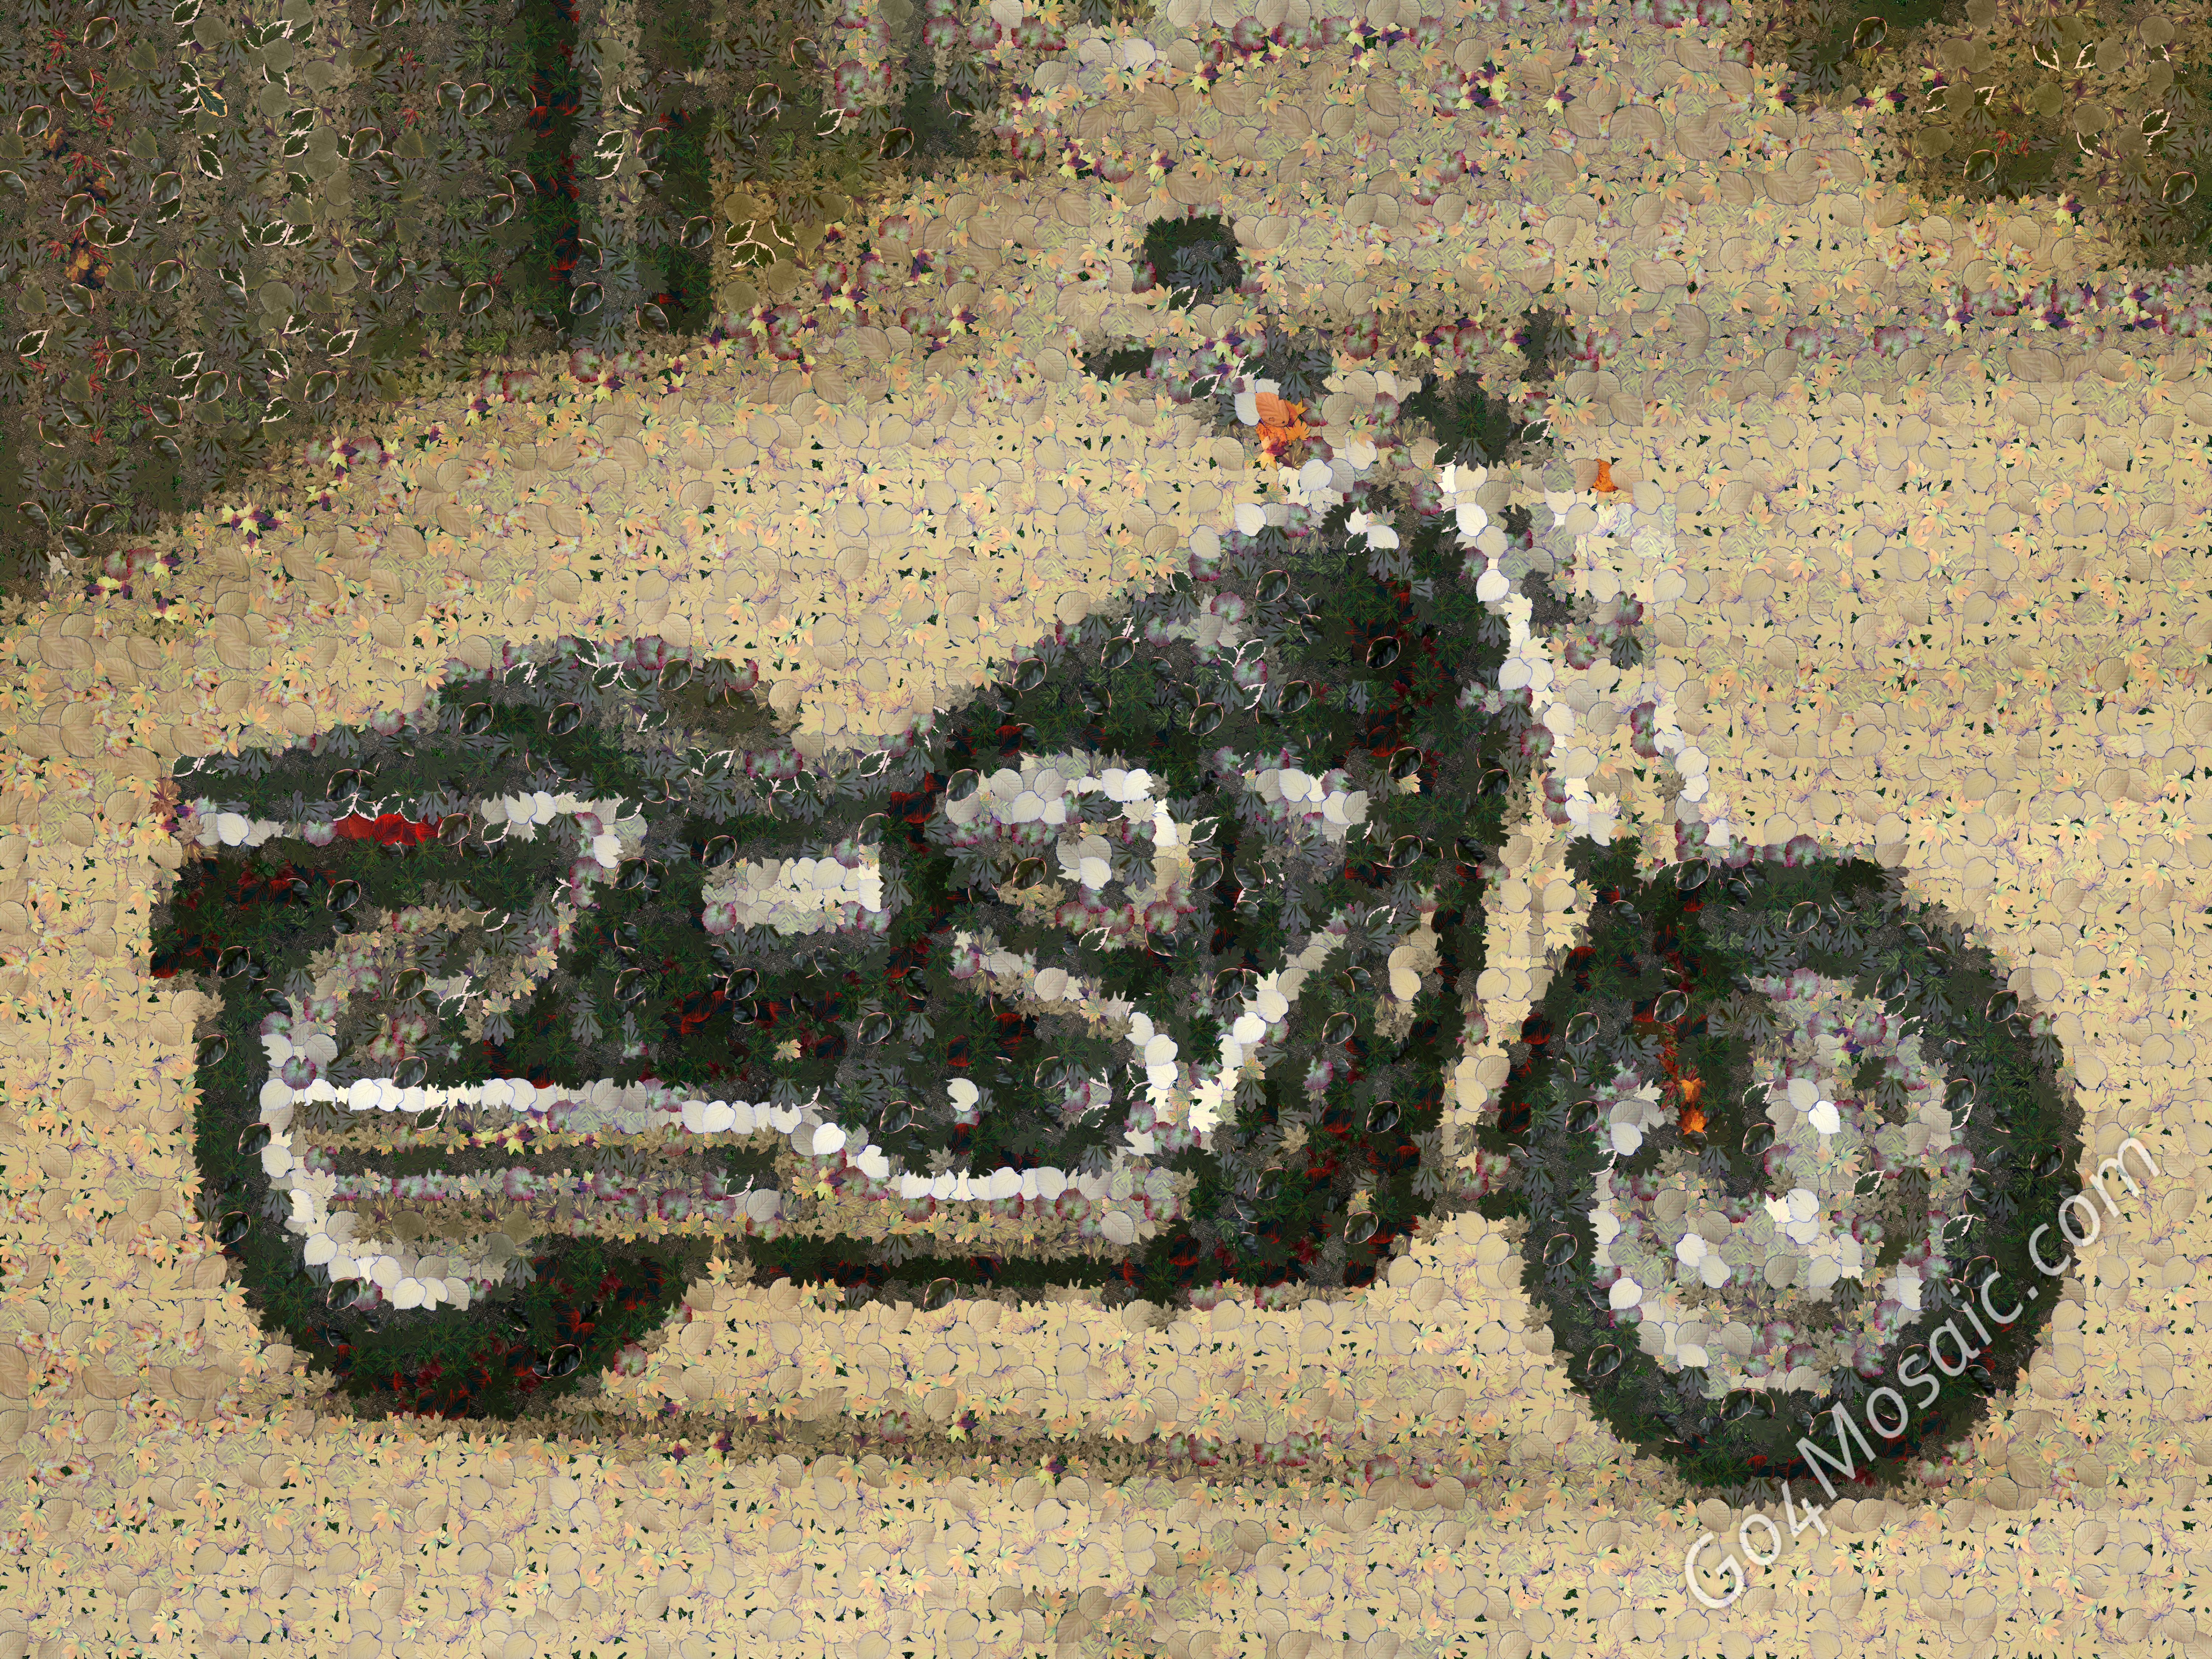 Harley mosaic from leaves